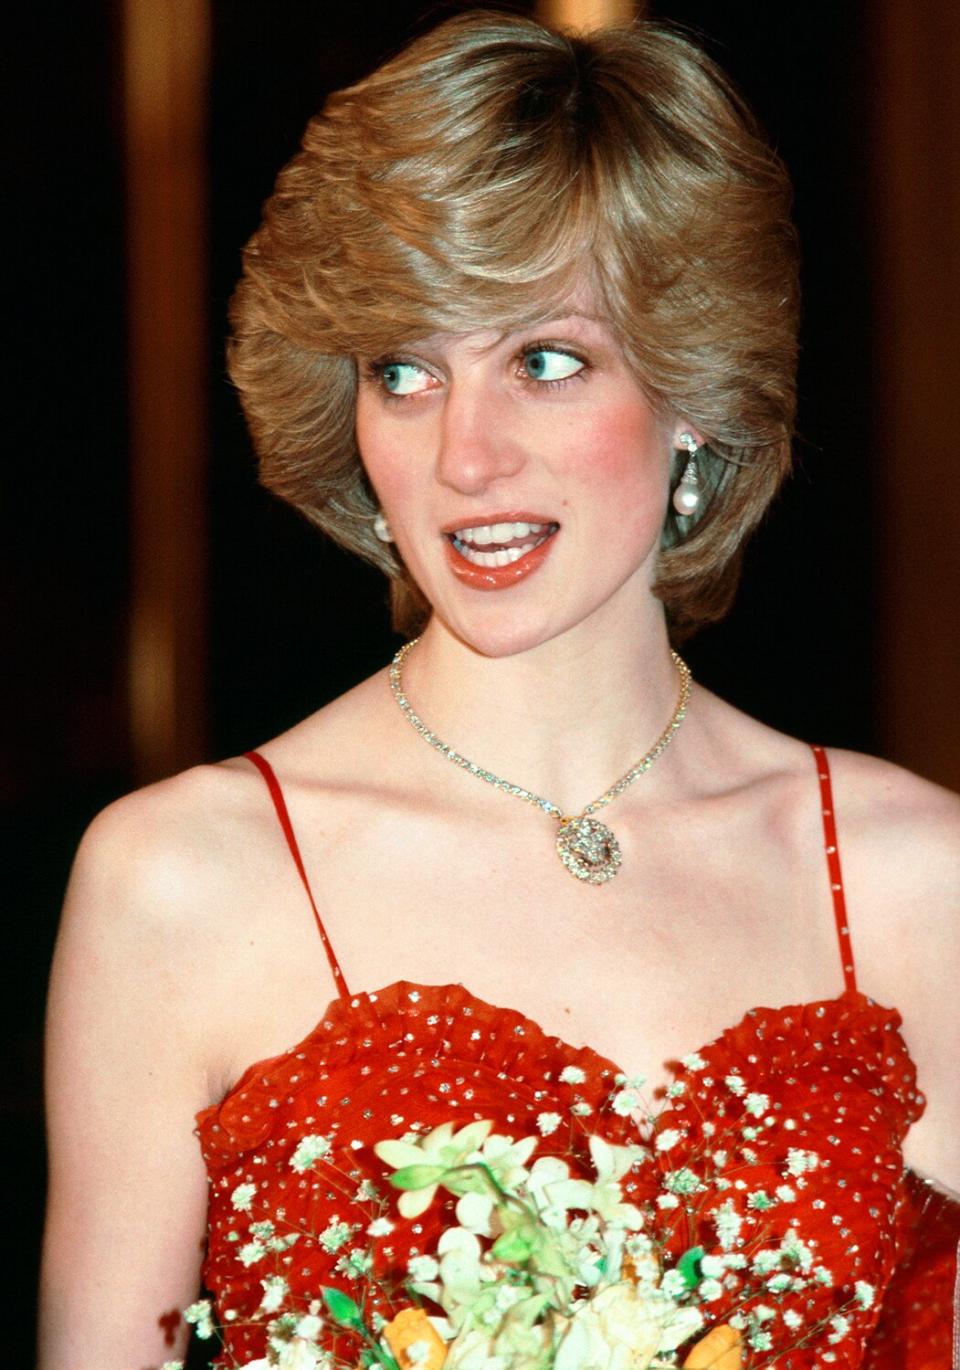 Princess Diana Wearing A Gold And Diamond Necklace In The Shape Of The Prince Of Wales Feathers For A Visit To The Royal Opera House